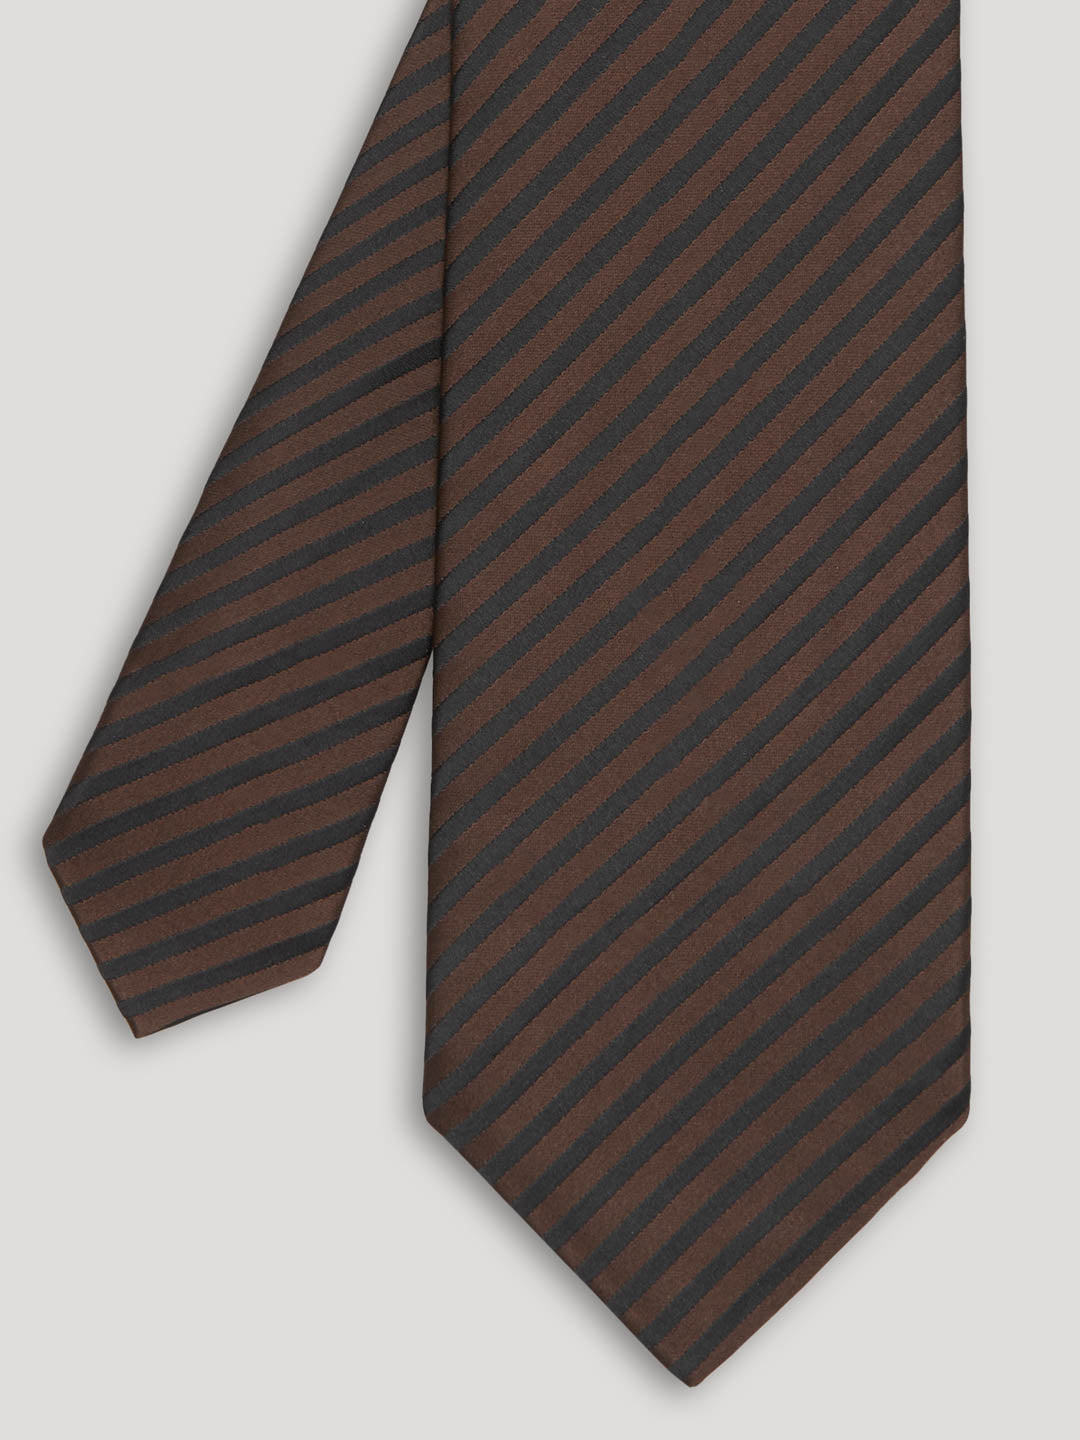 Black and brown striped silk tie. 